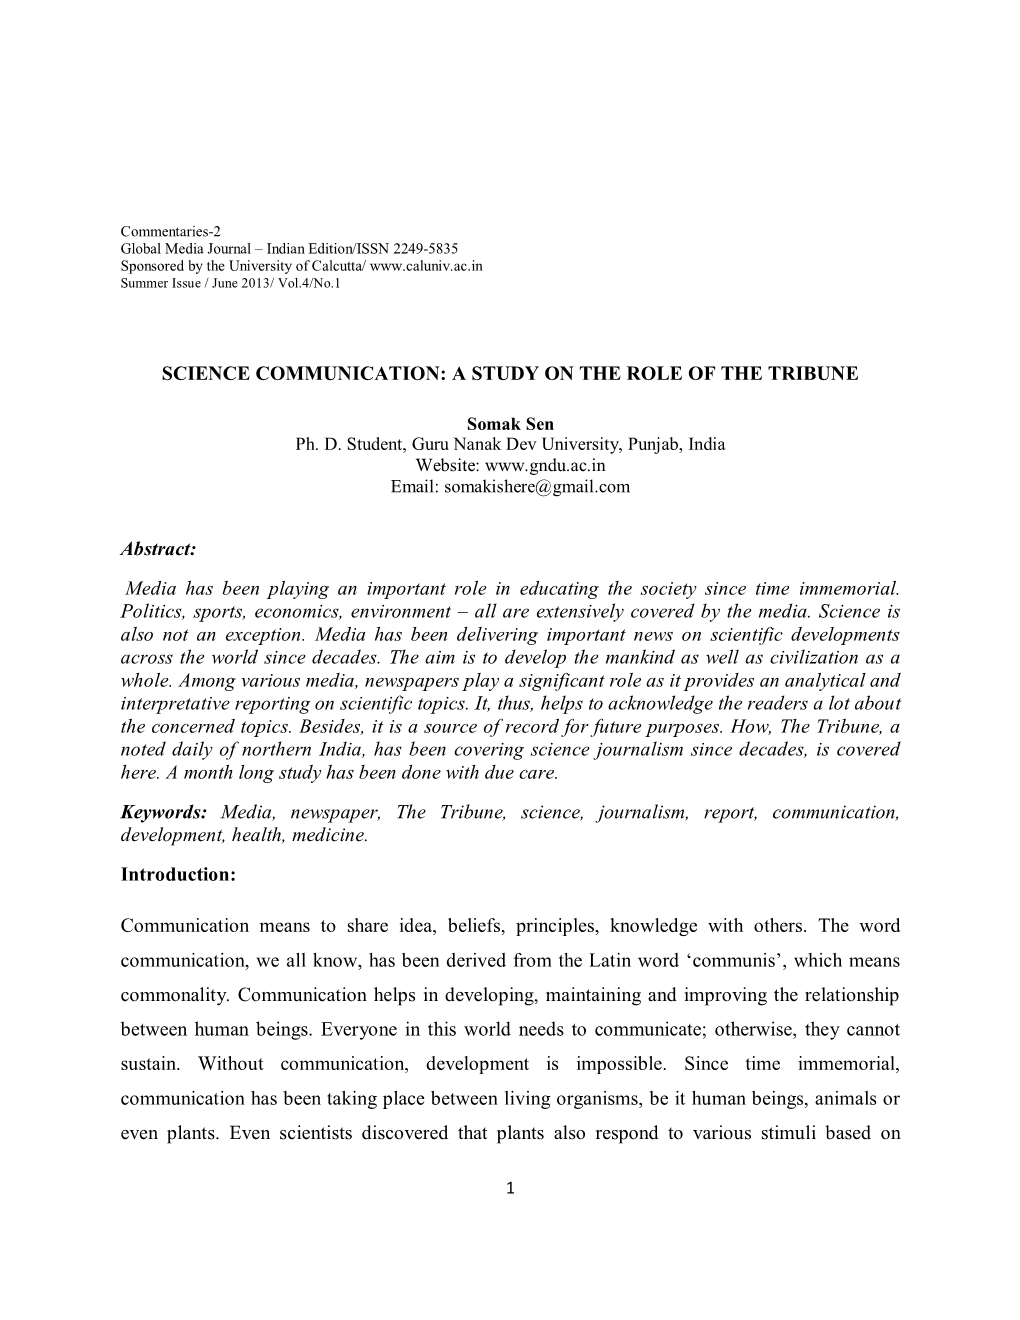 SCIENCE COMMUNICATION: a STUDY on the ROLE of the TRIBUNE Abstract